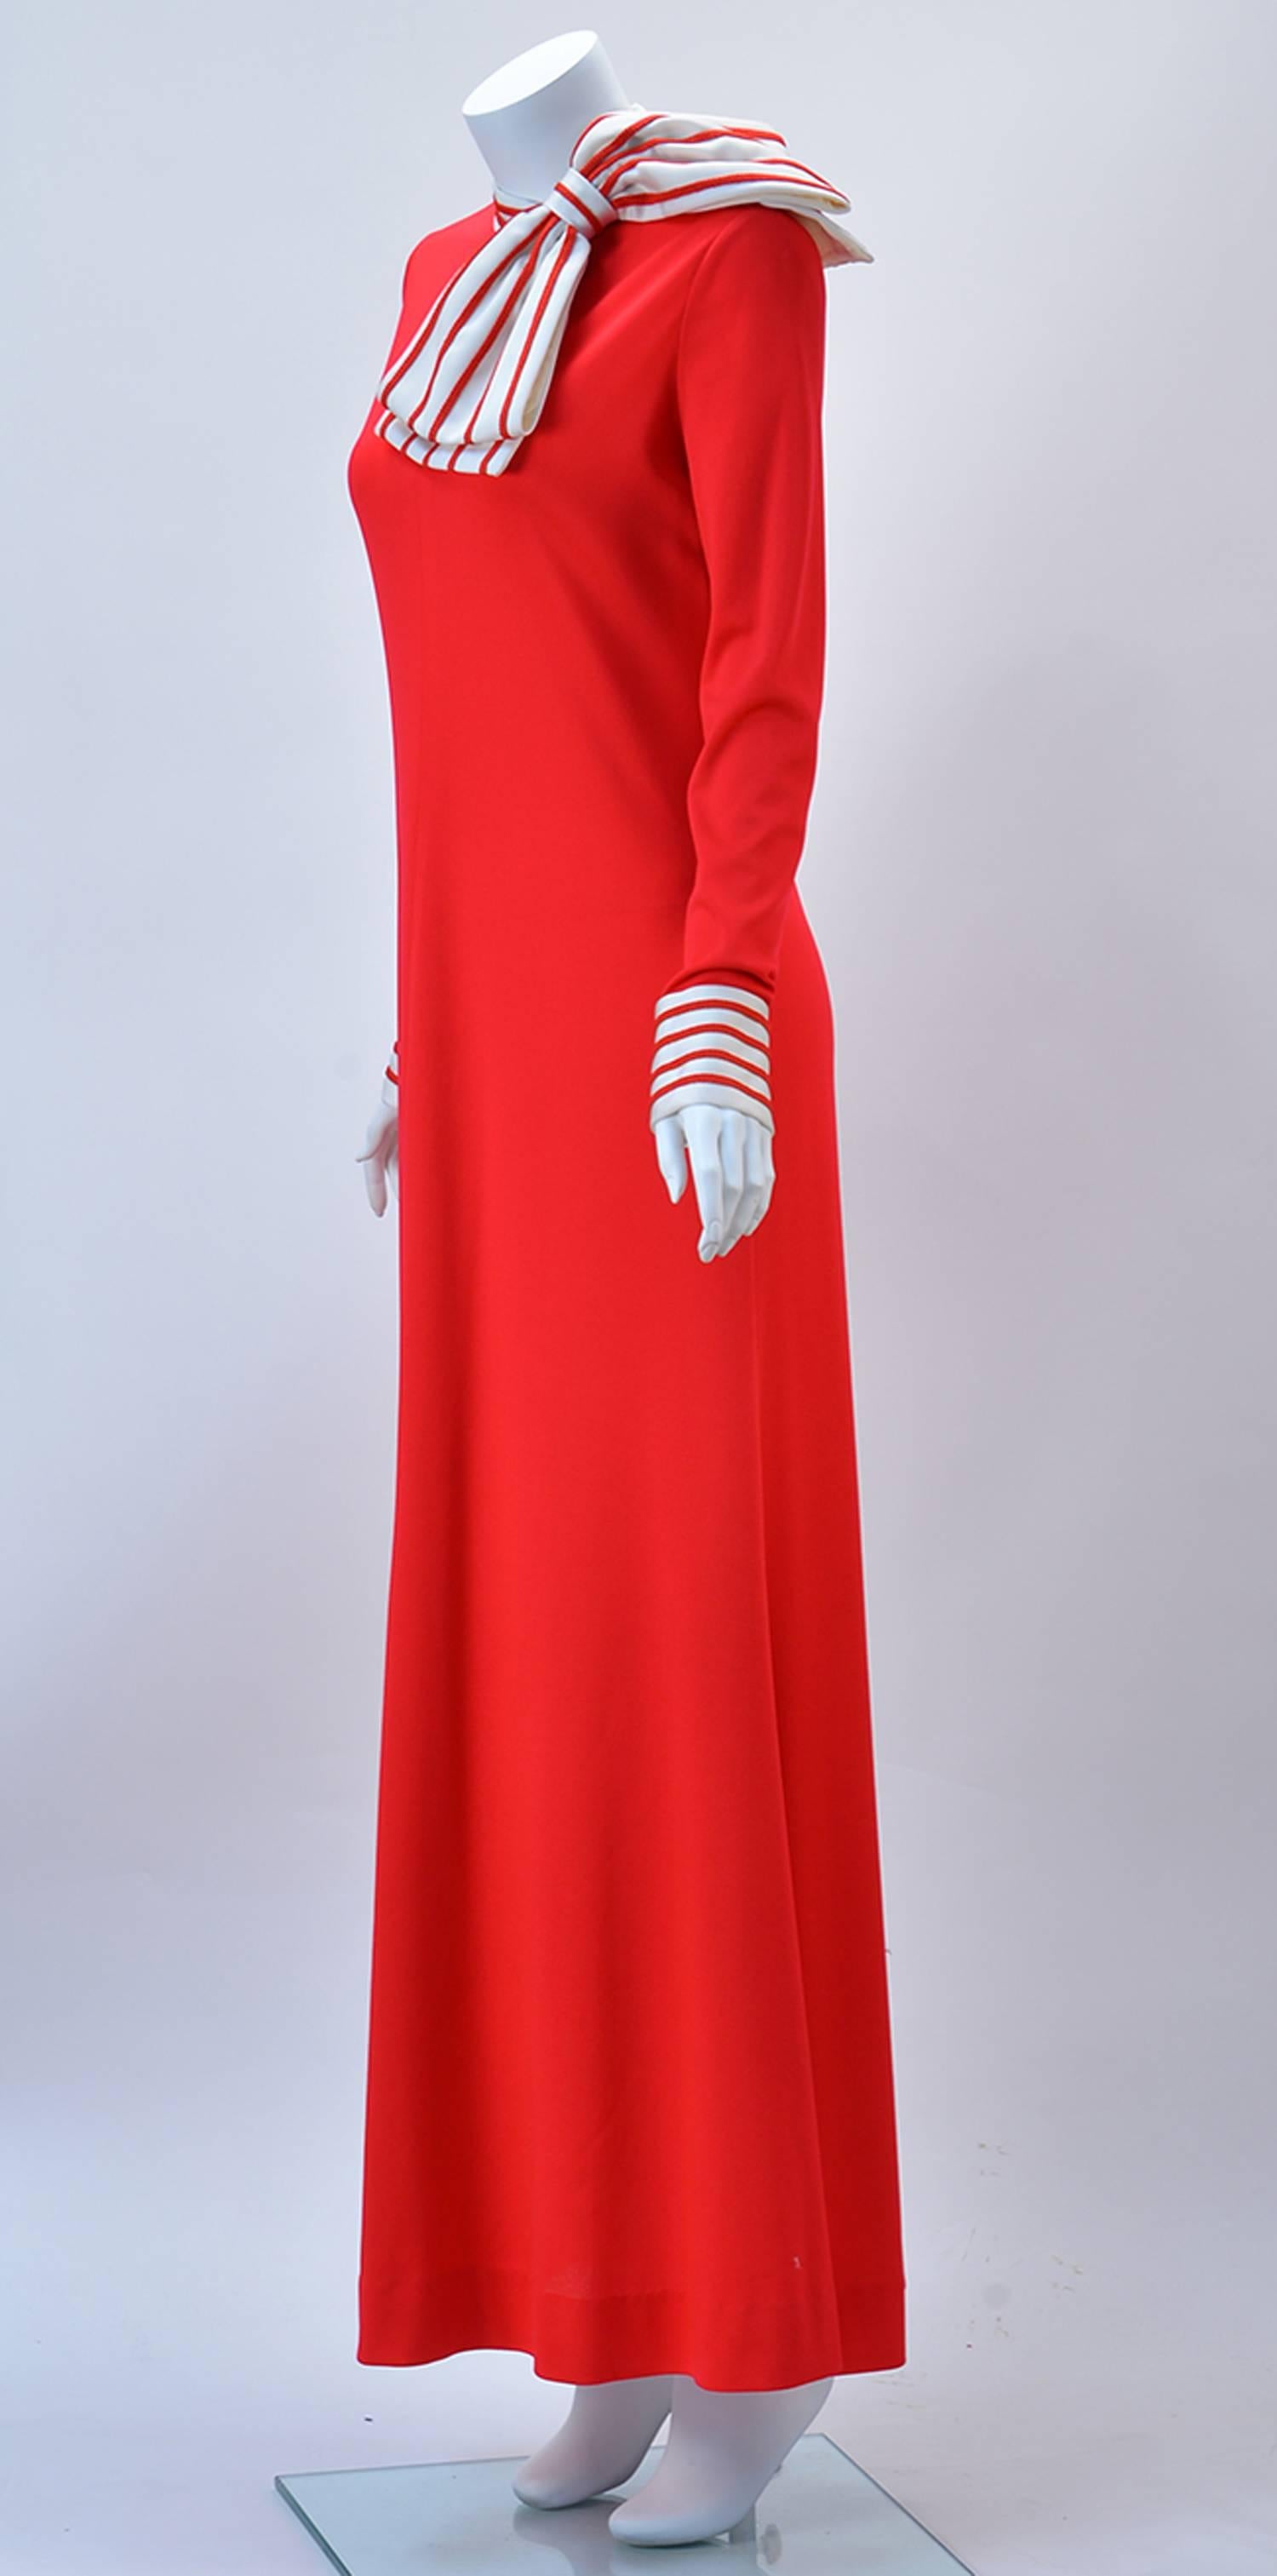 Fabulous red knit maxi dress with white and red large bow is a sumptuous  AND conservative beauty, but it is also amazingly comfortable! 

The red and white pattern can be found around the collar as well as on the cuffs of the sleeves. Trim on